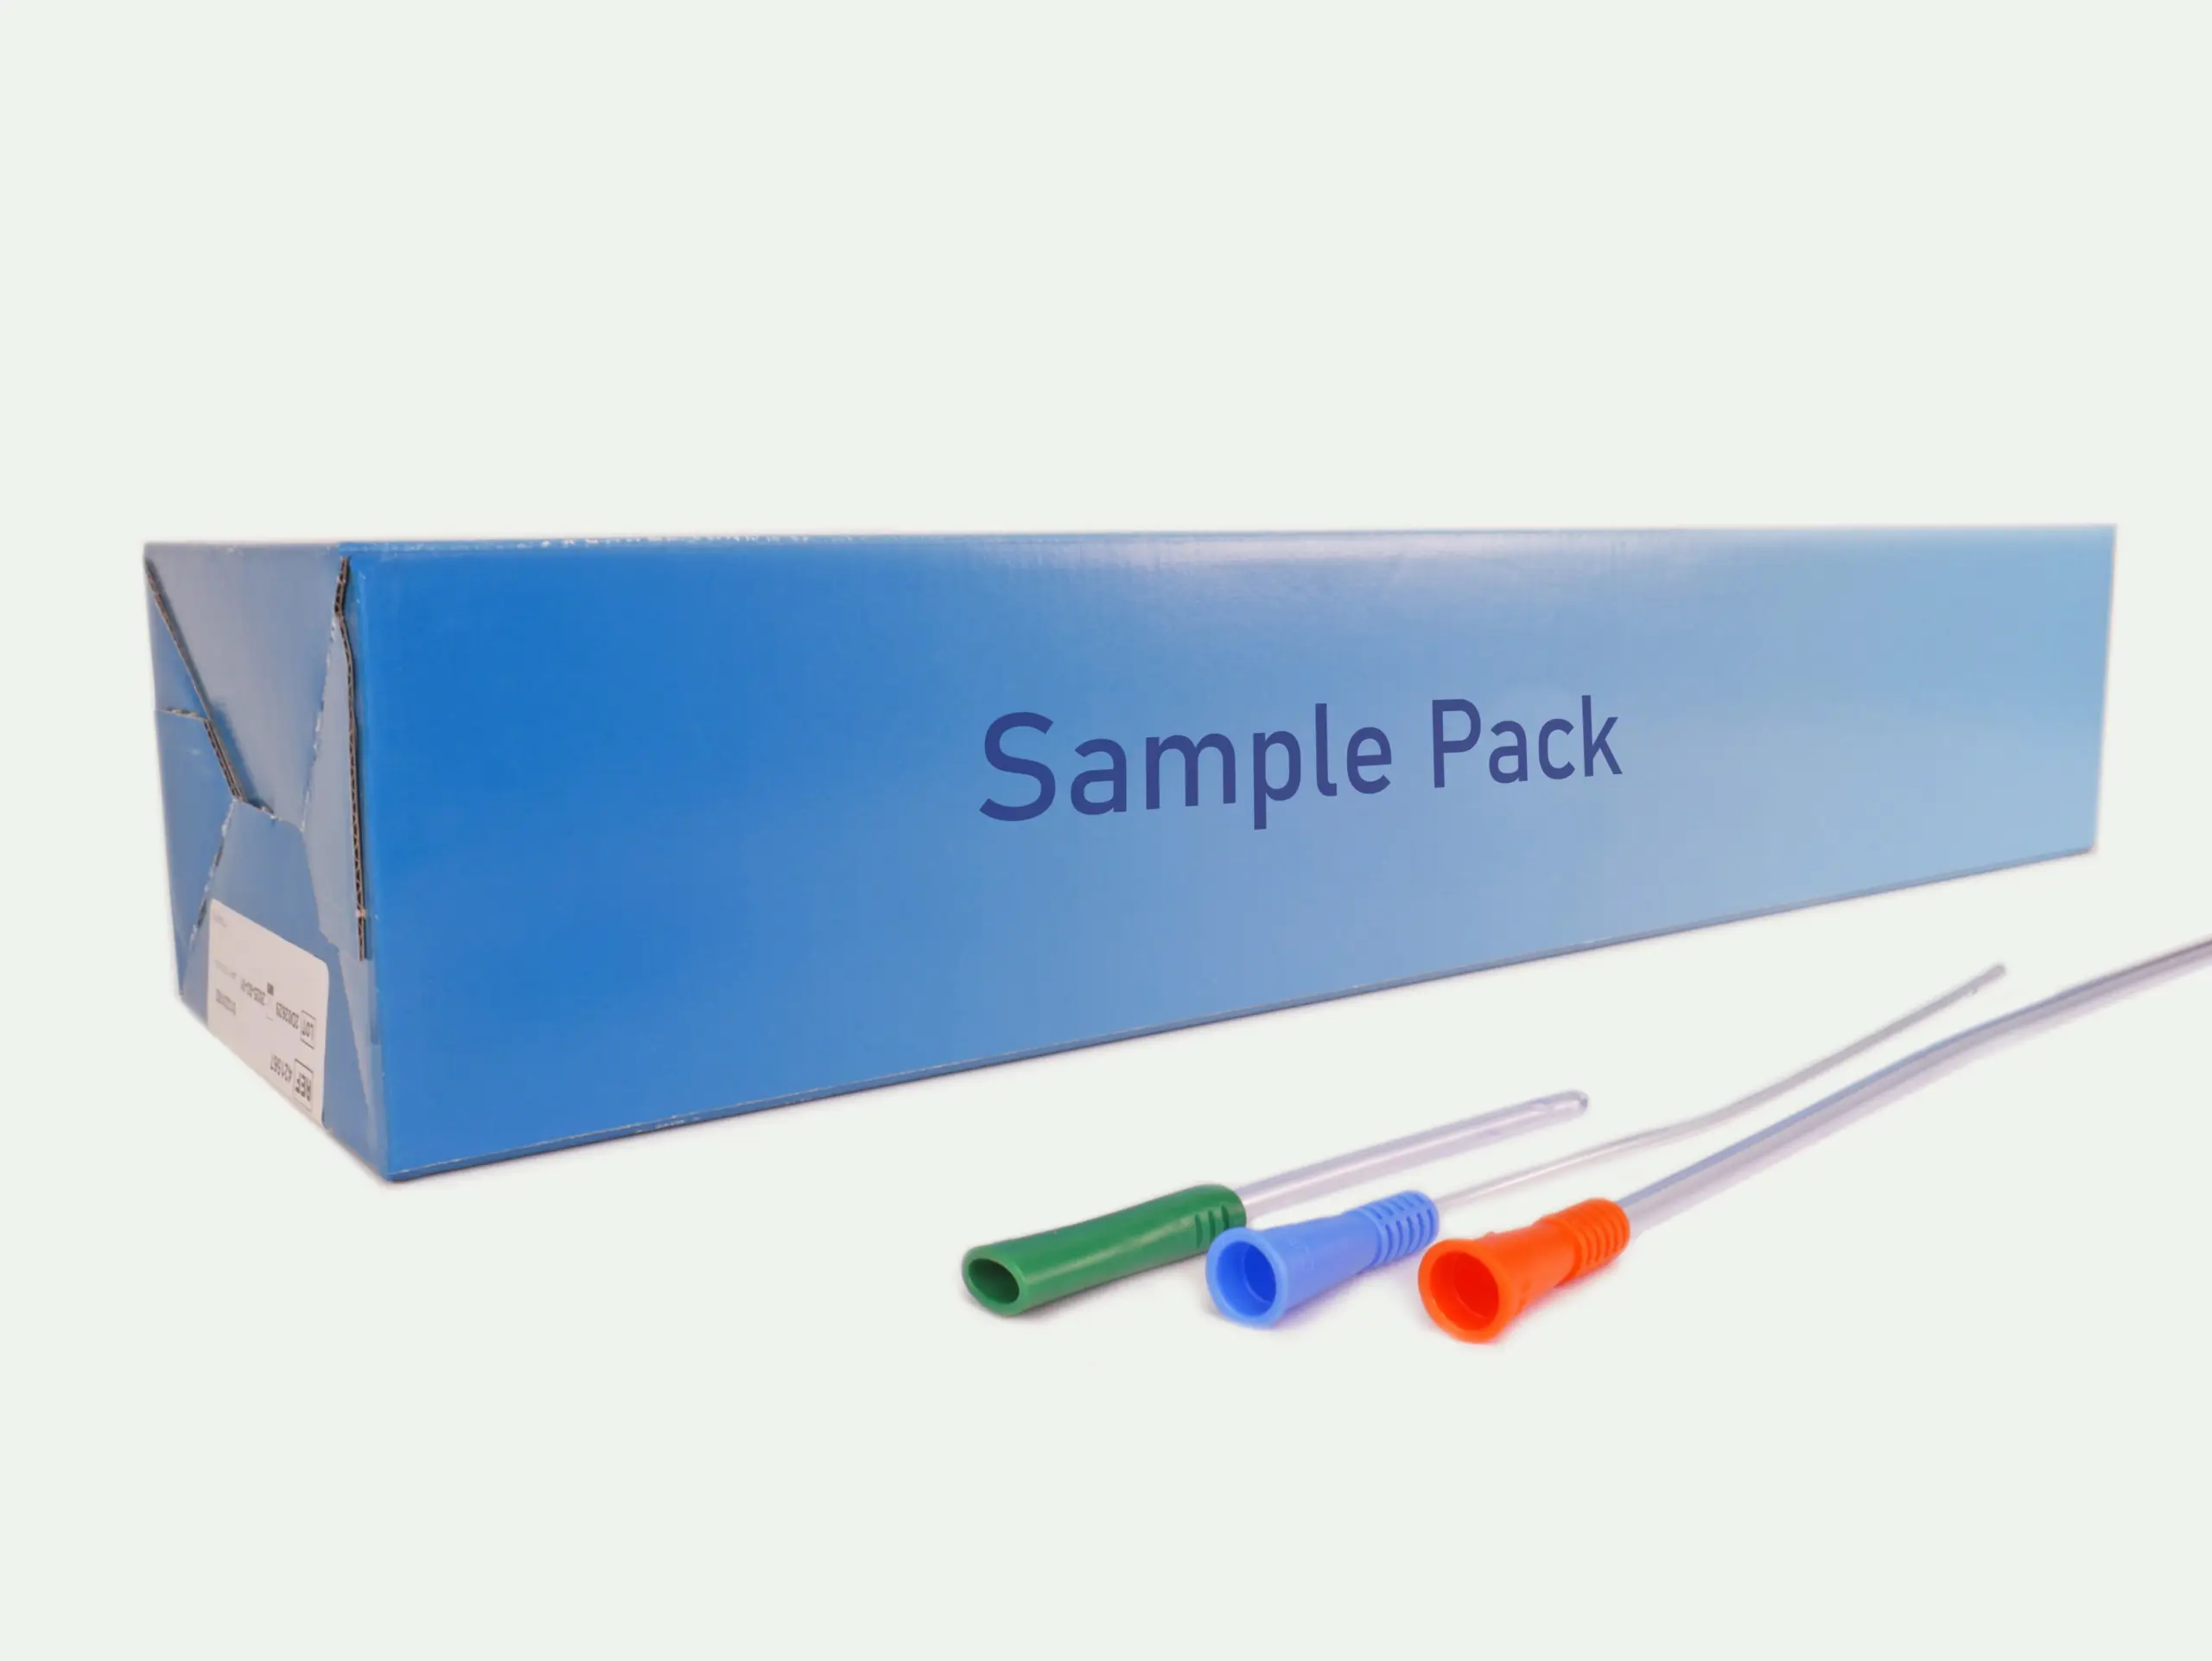 Picture of a box for the 3-Day Free Sample pack of multiple catheters from RA Fischer. In front of it are three catheters with different colored grippers